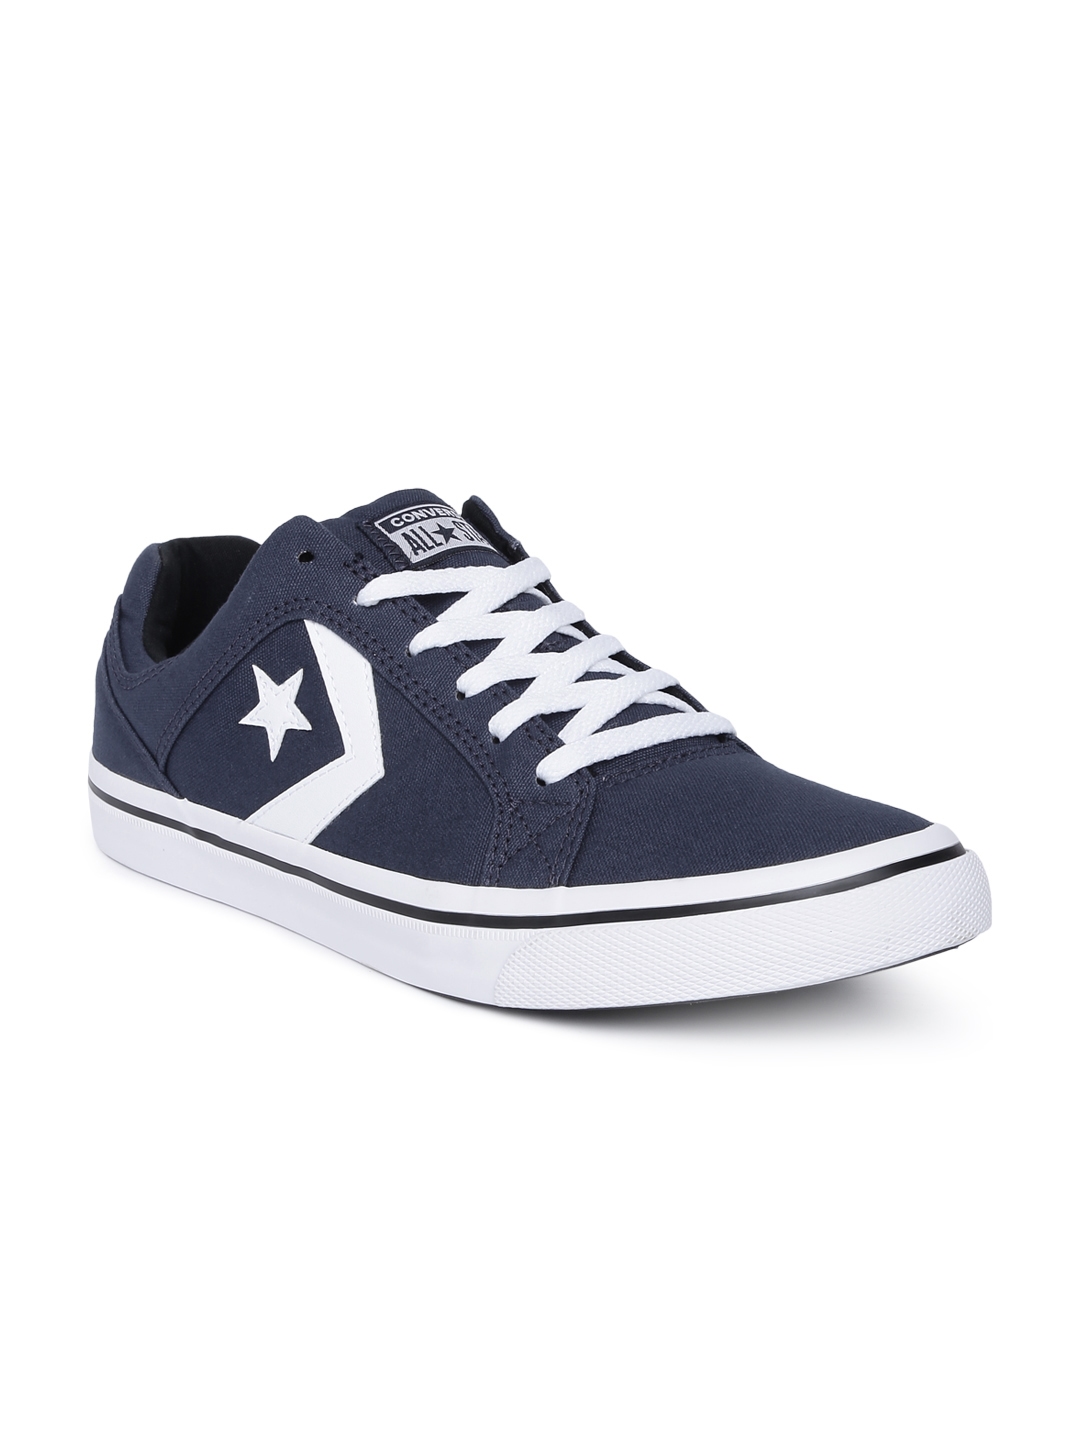 Buy Converse LAM Hustle Navy Blue Sneakers - Casual Shoes for Men 2419567 |  Myntra